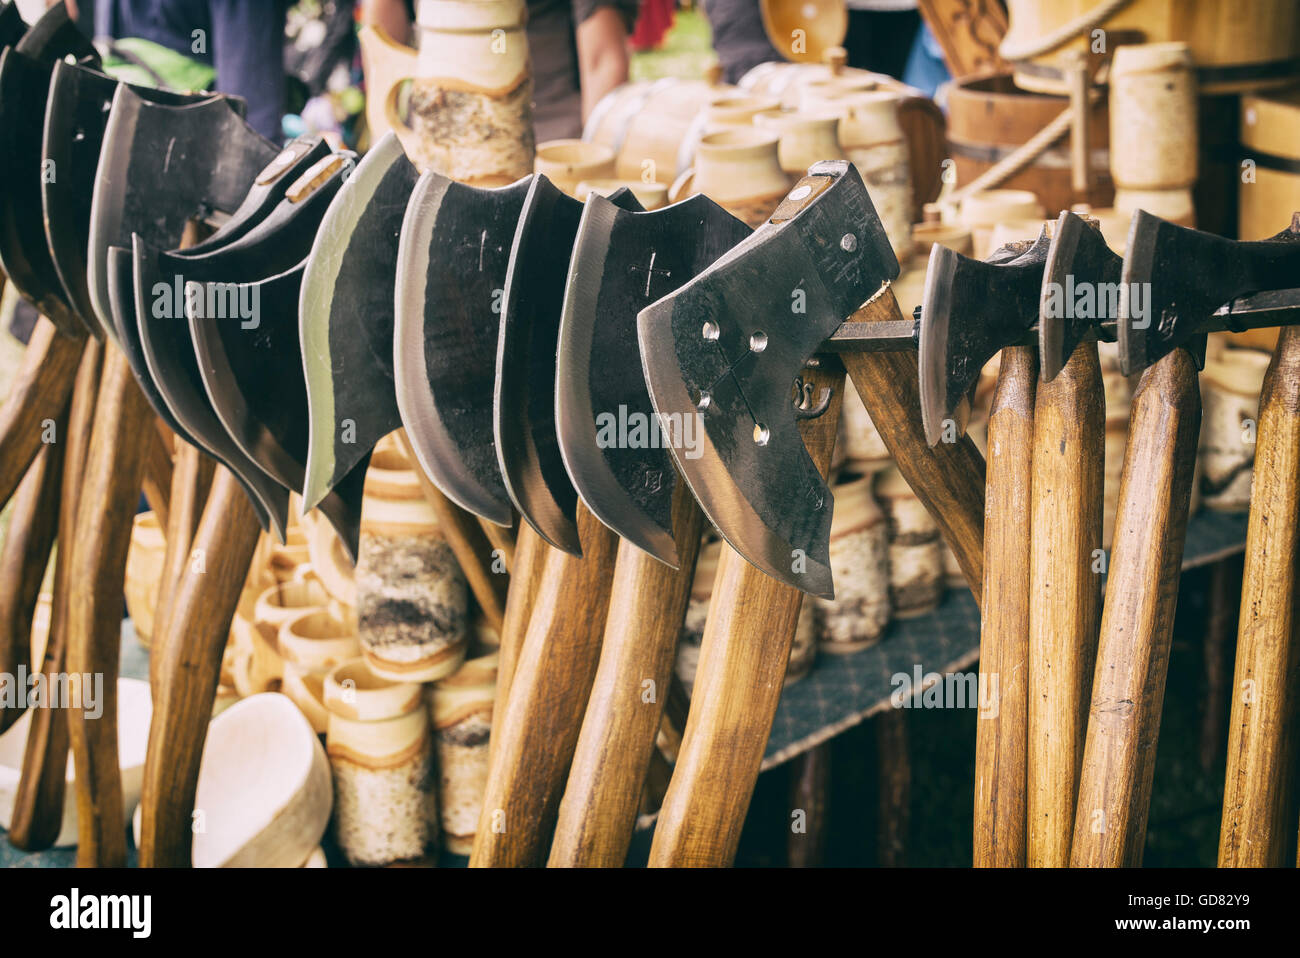 Replica medieval battle axes at the Tewkesbury medieval festival 2016, Gloucestershire, England. Vintage filter applied Stock Photo